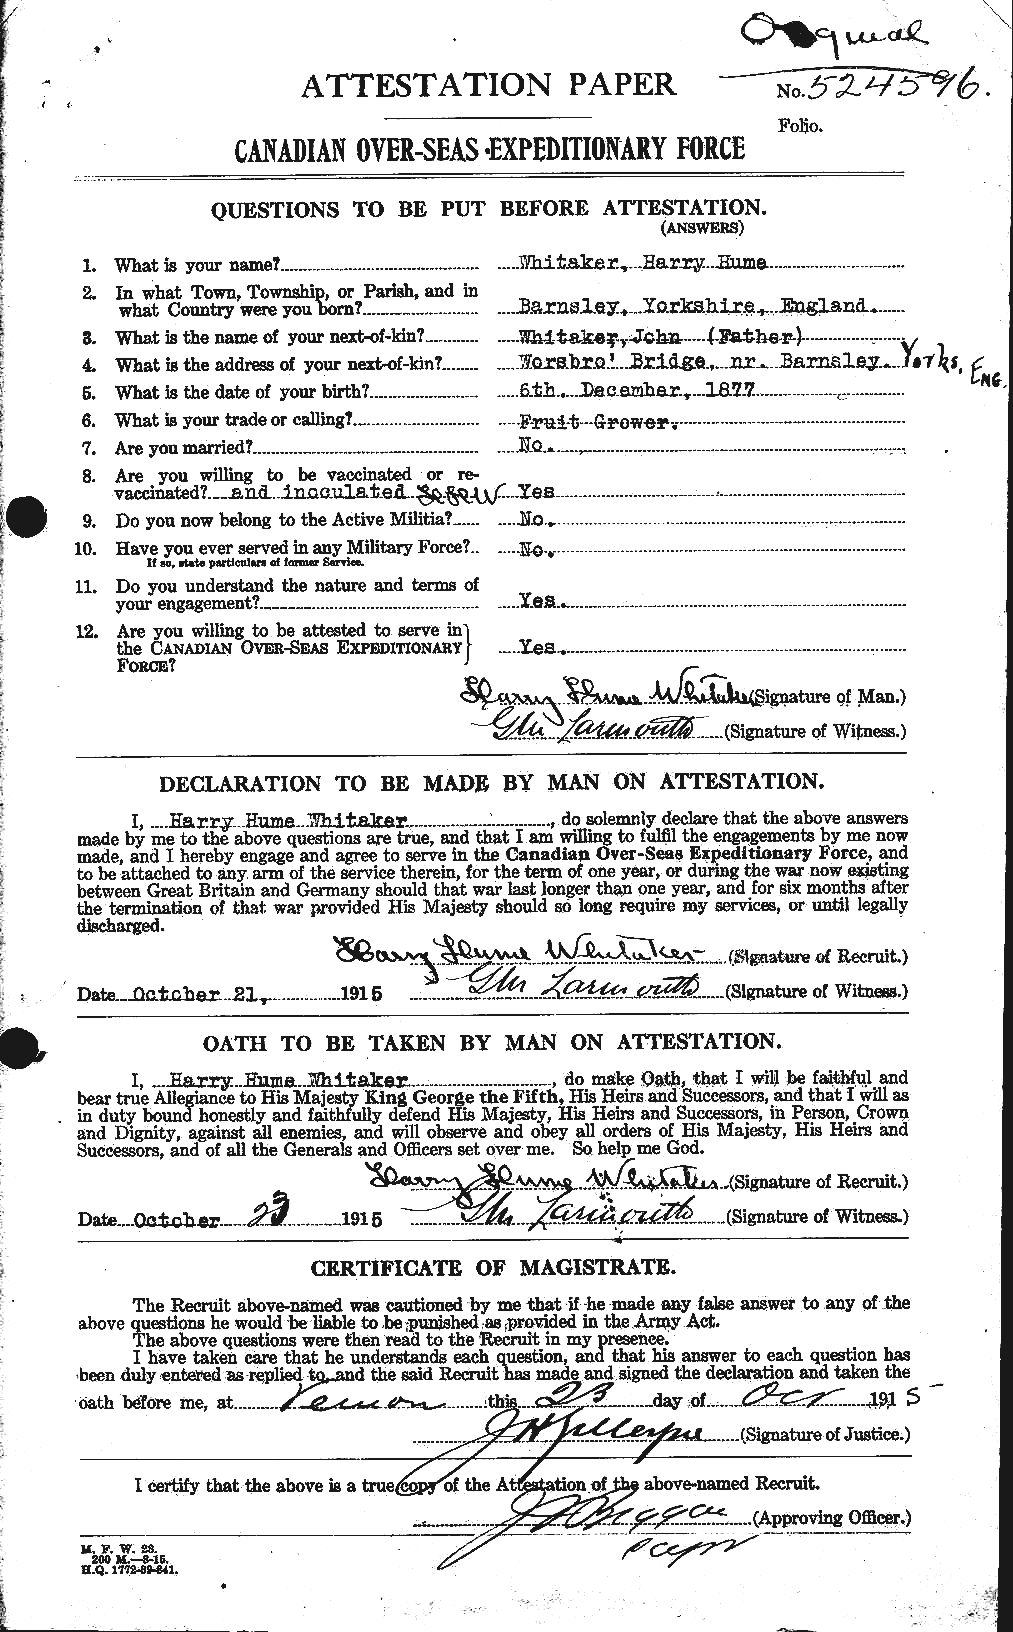 Personnel Records of the First World War - CEF 668825a